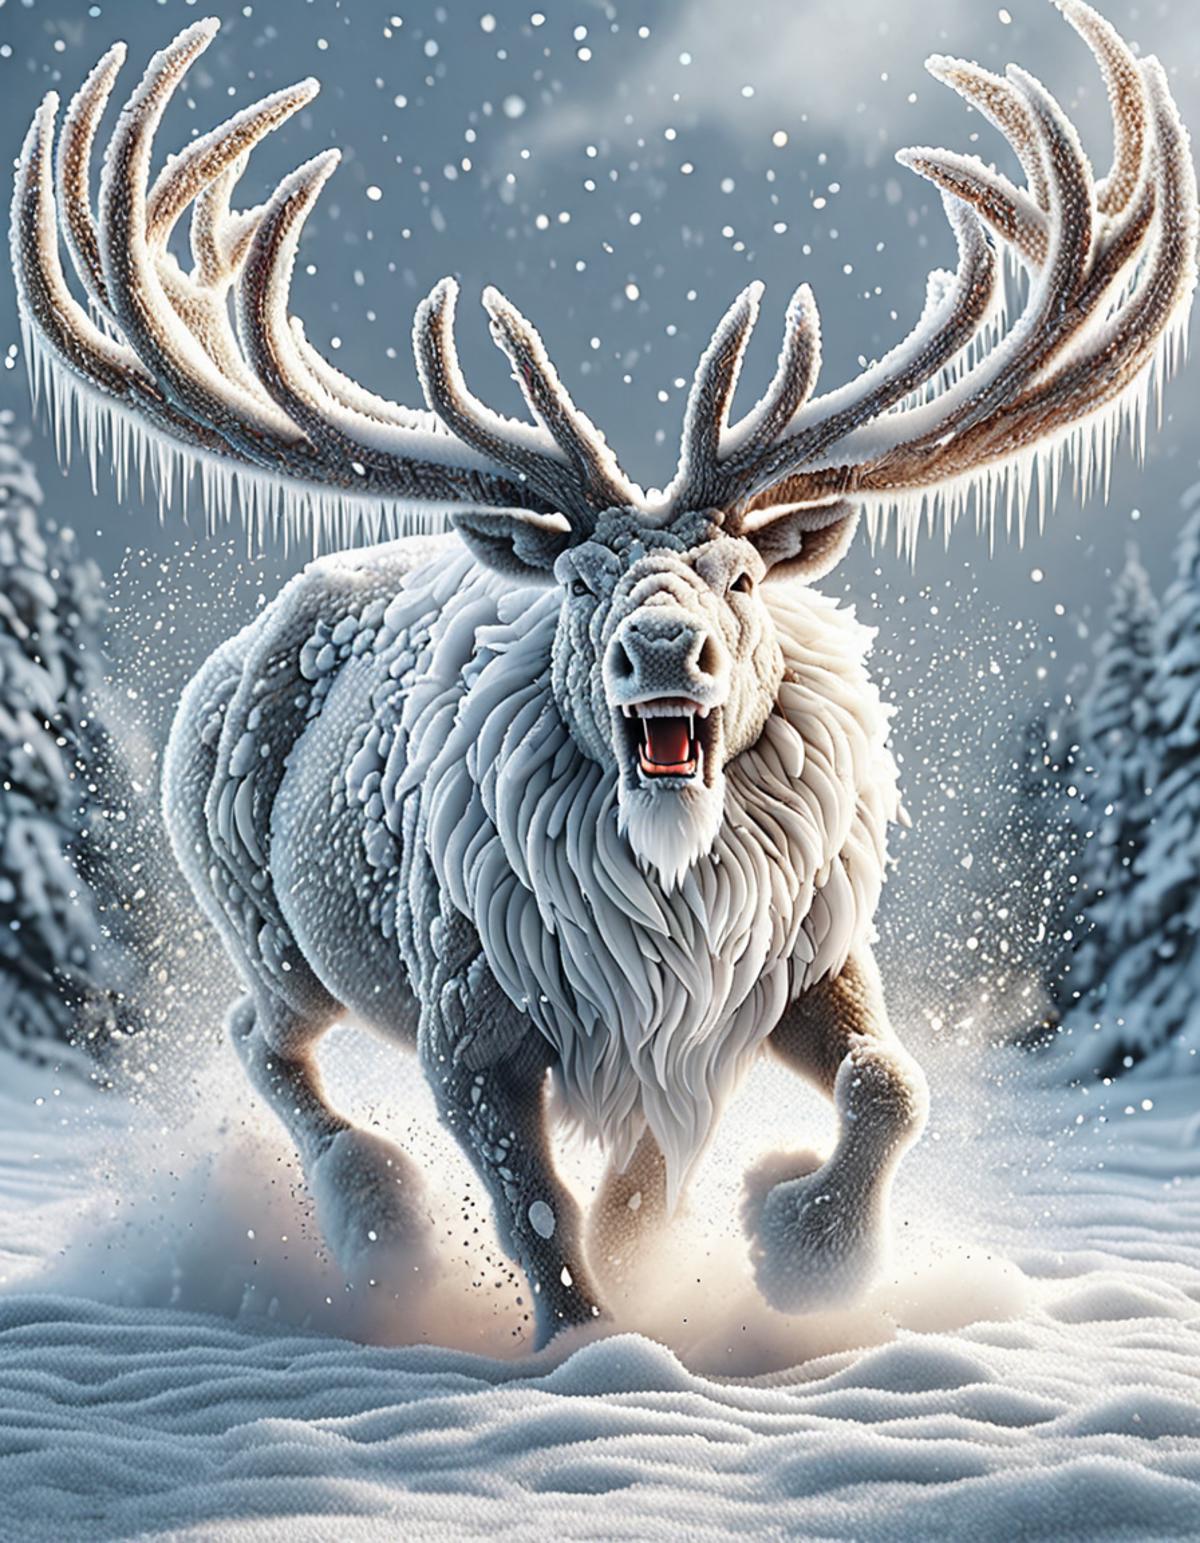 A snowy scene featuring a large deer with antlers.